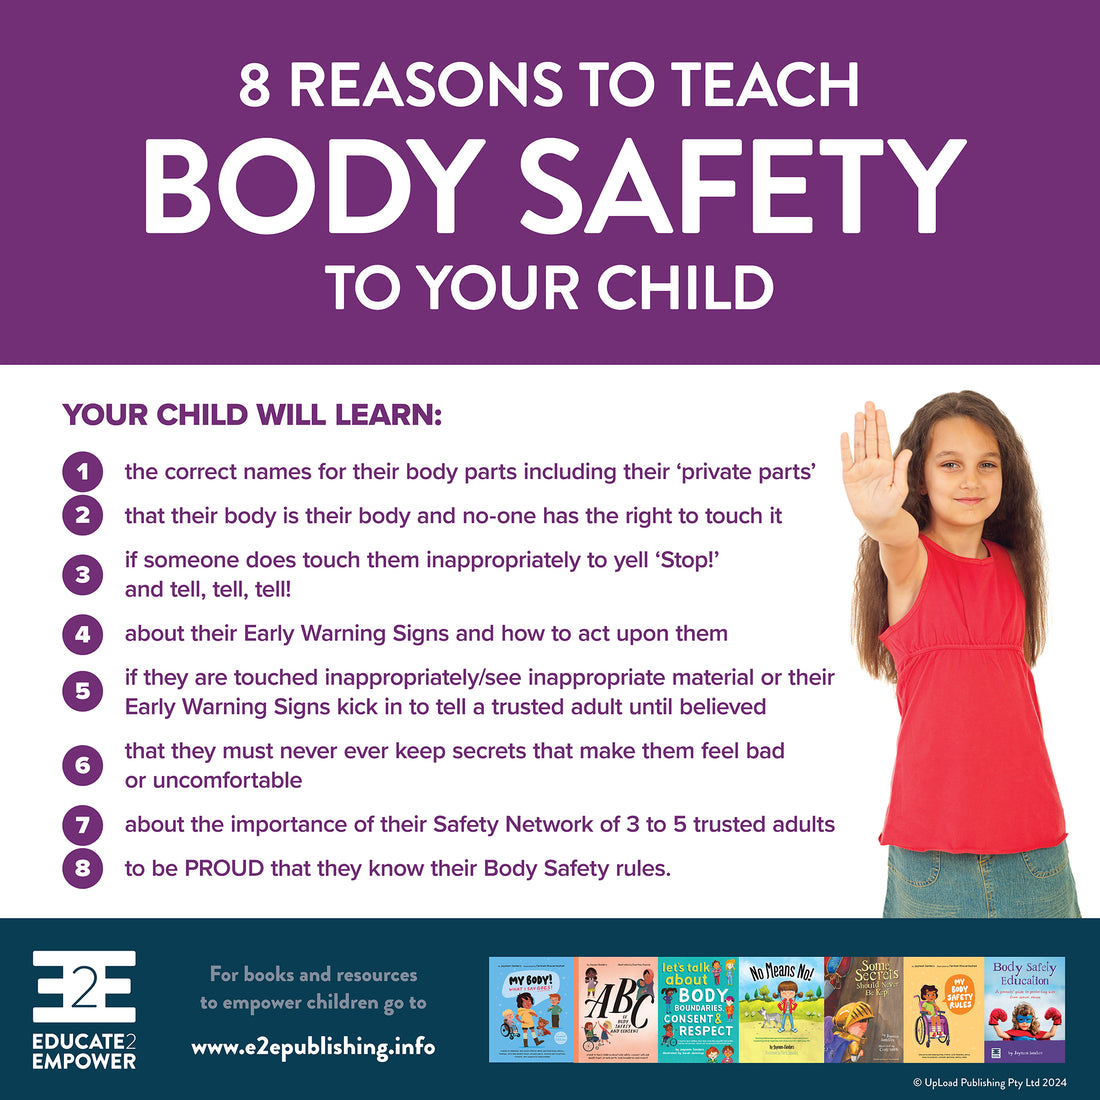 8 REASONS TO TEACH BODY SAFETY TO YOUR CHILD